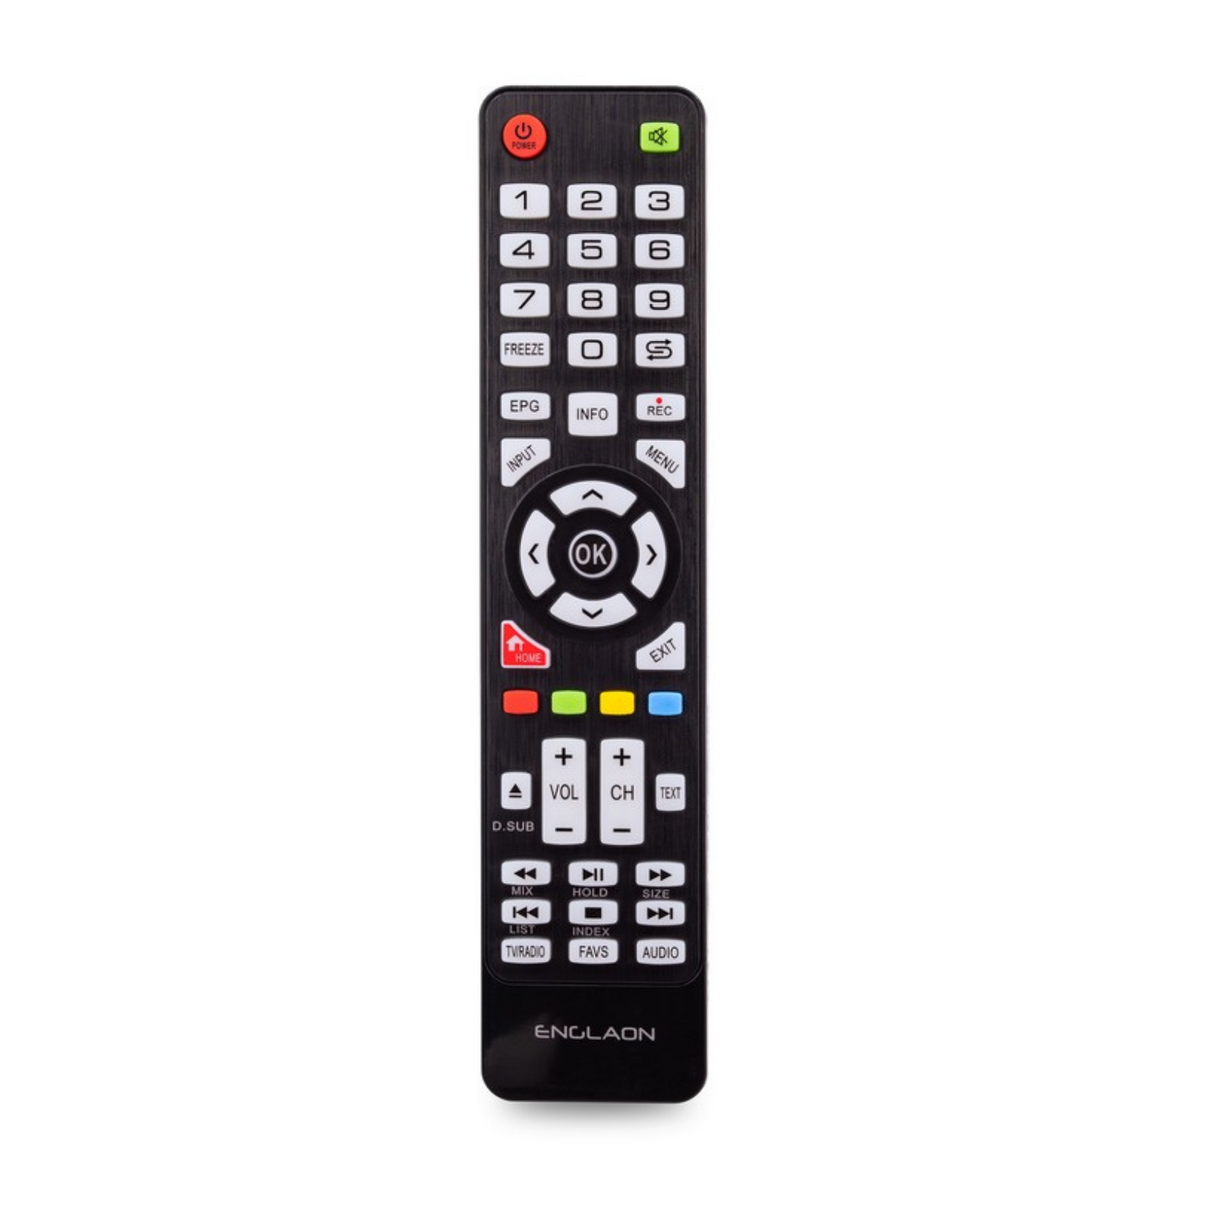 ENGLAON TV remote control for LCD/LED TVs